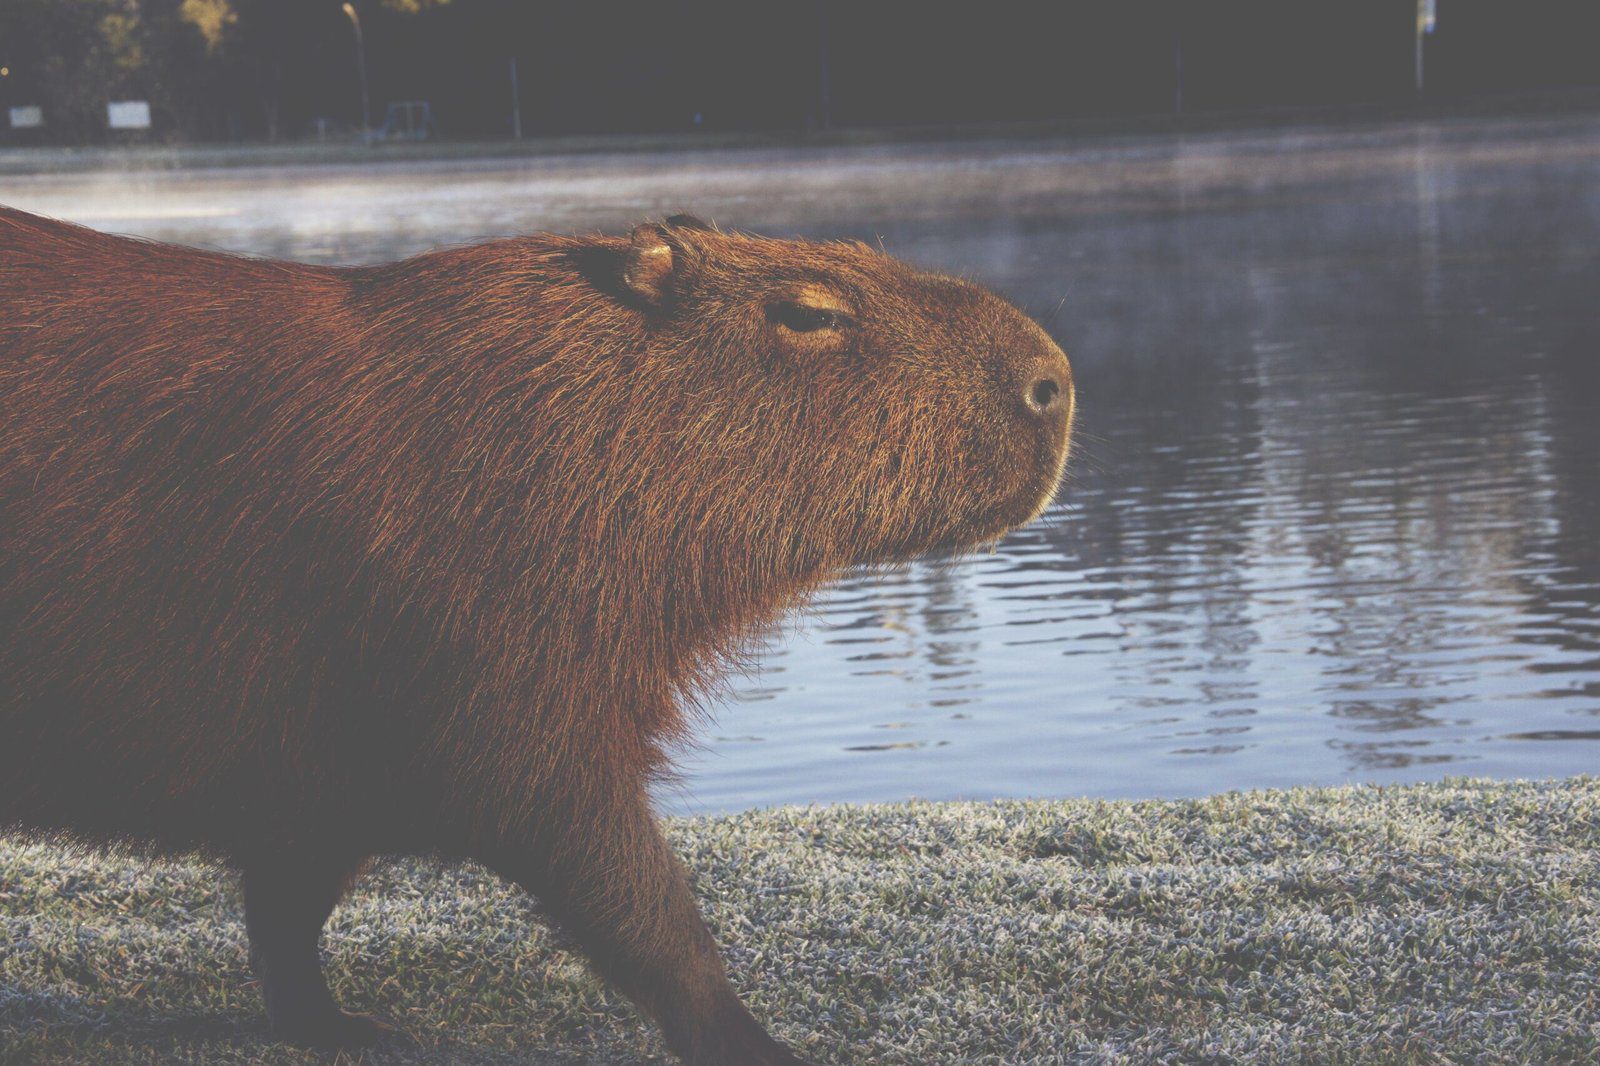 How to Find and Adopt a Capybara